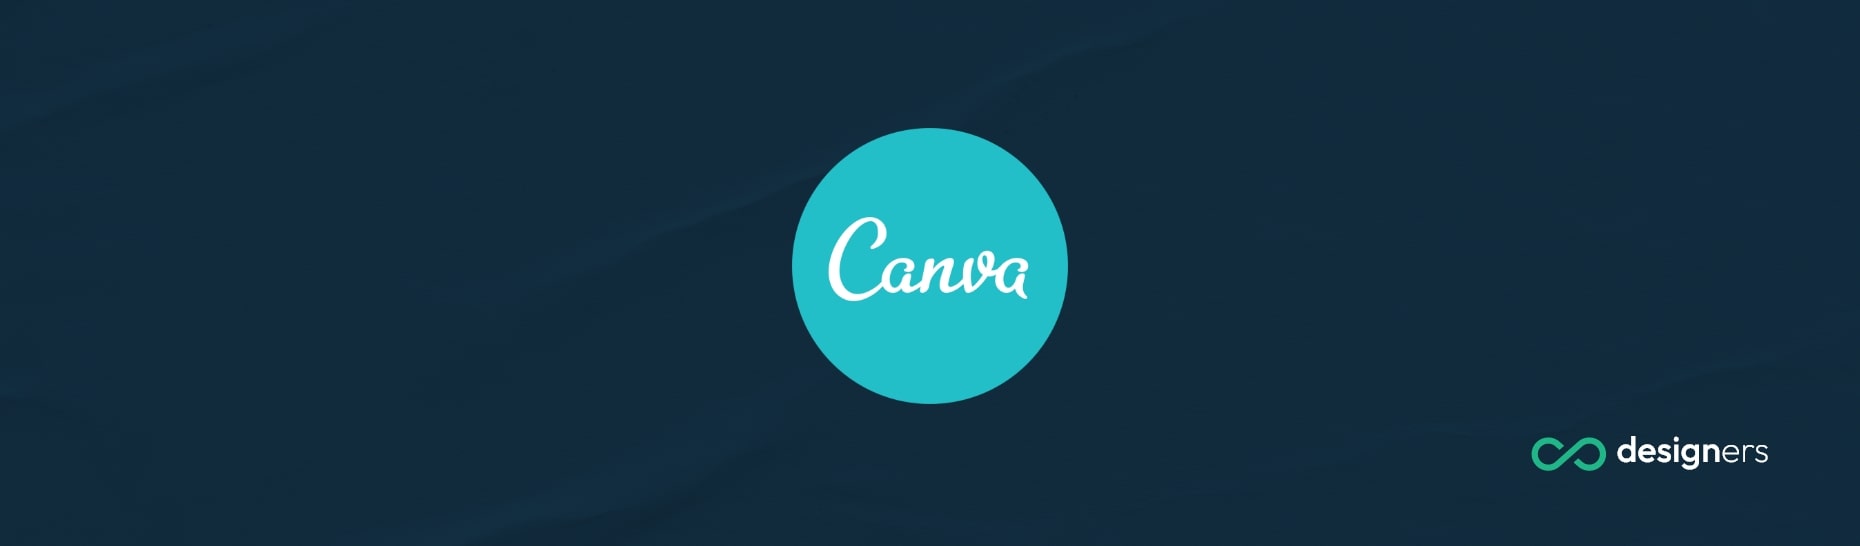 How Do Graphic Designers Use Canva?